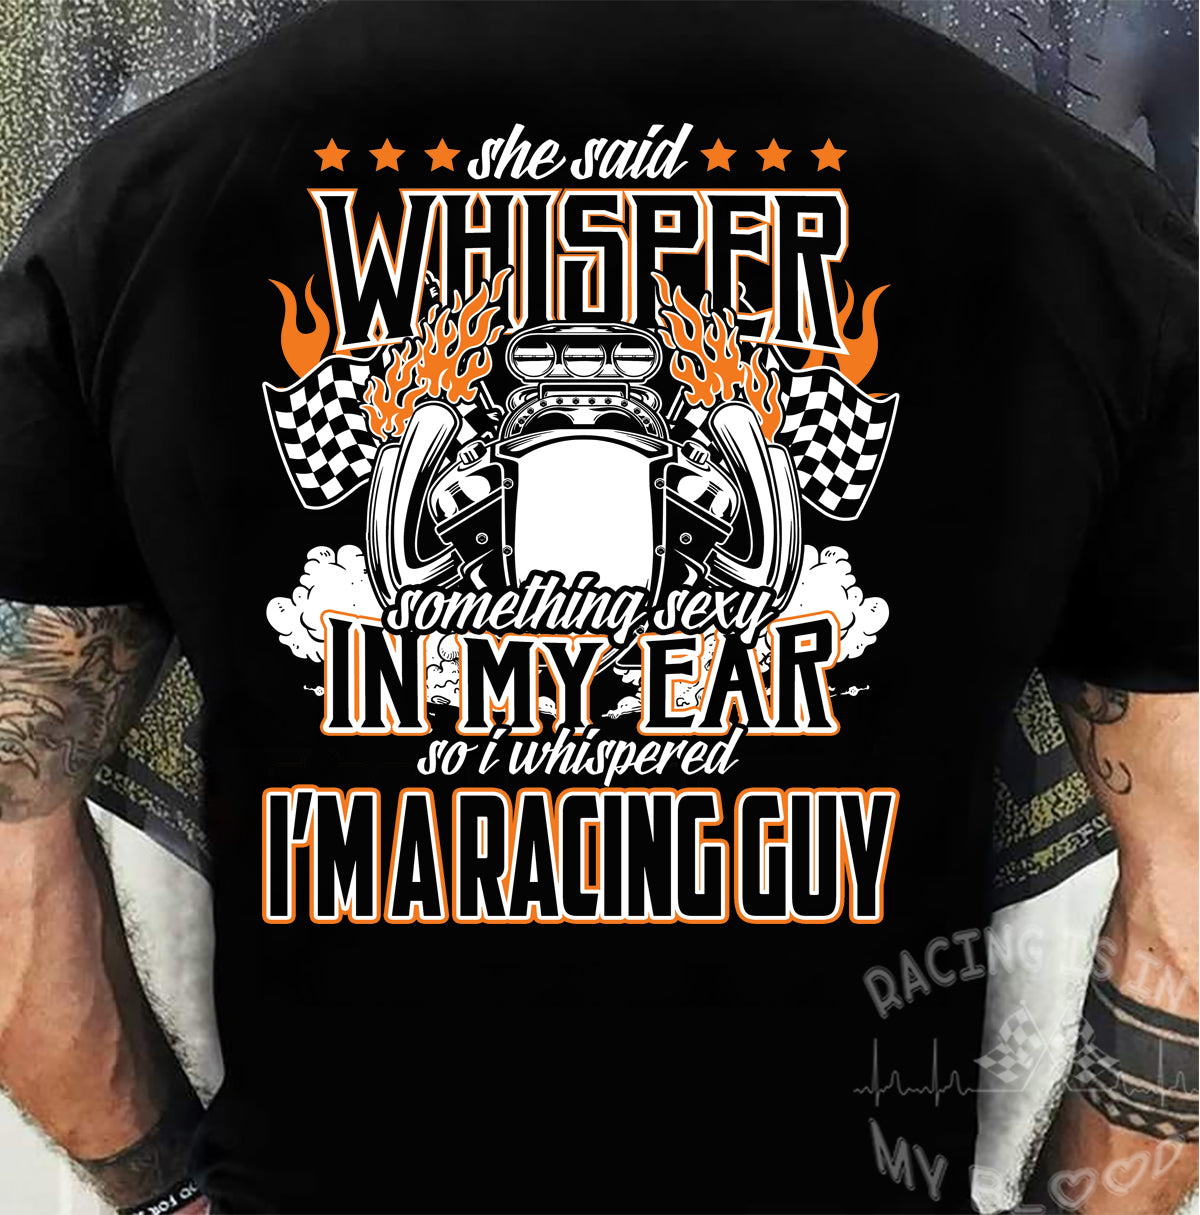 She Said Whisper Something Sexy In My Ear, So I whispered I'm A Racing Guy T-Shirts!